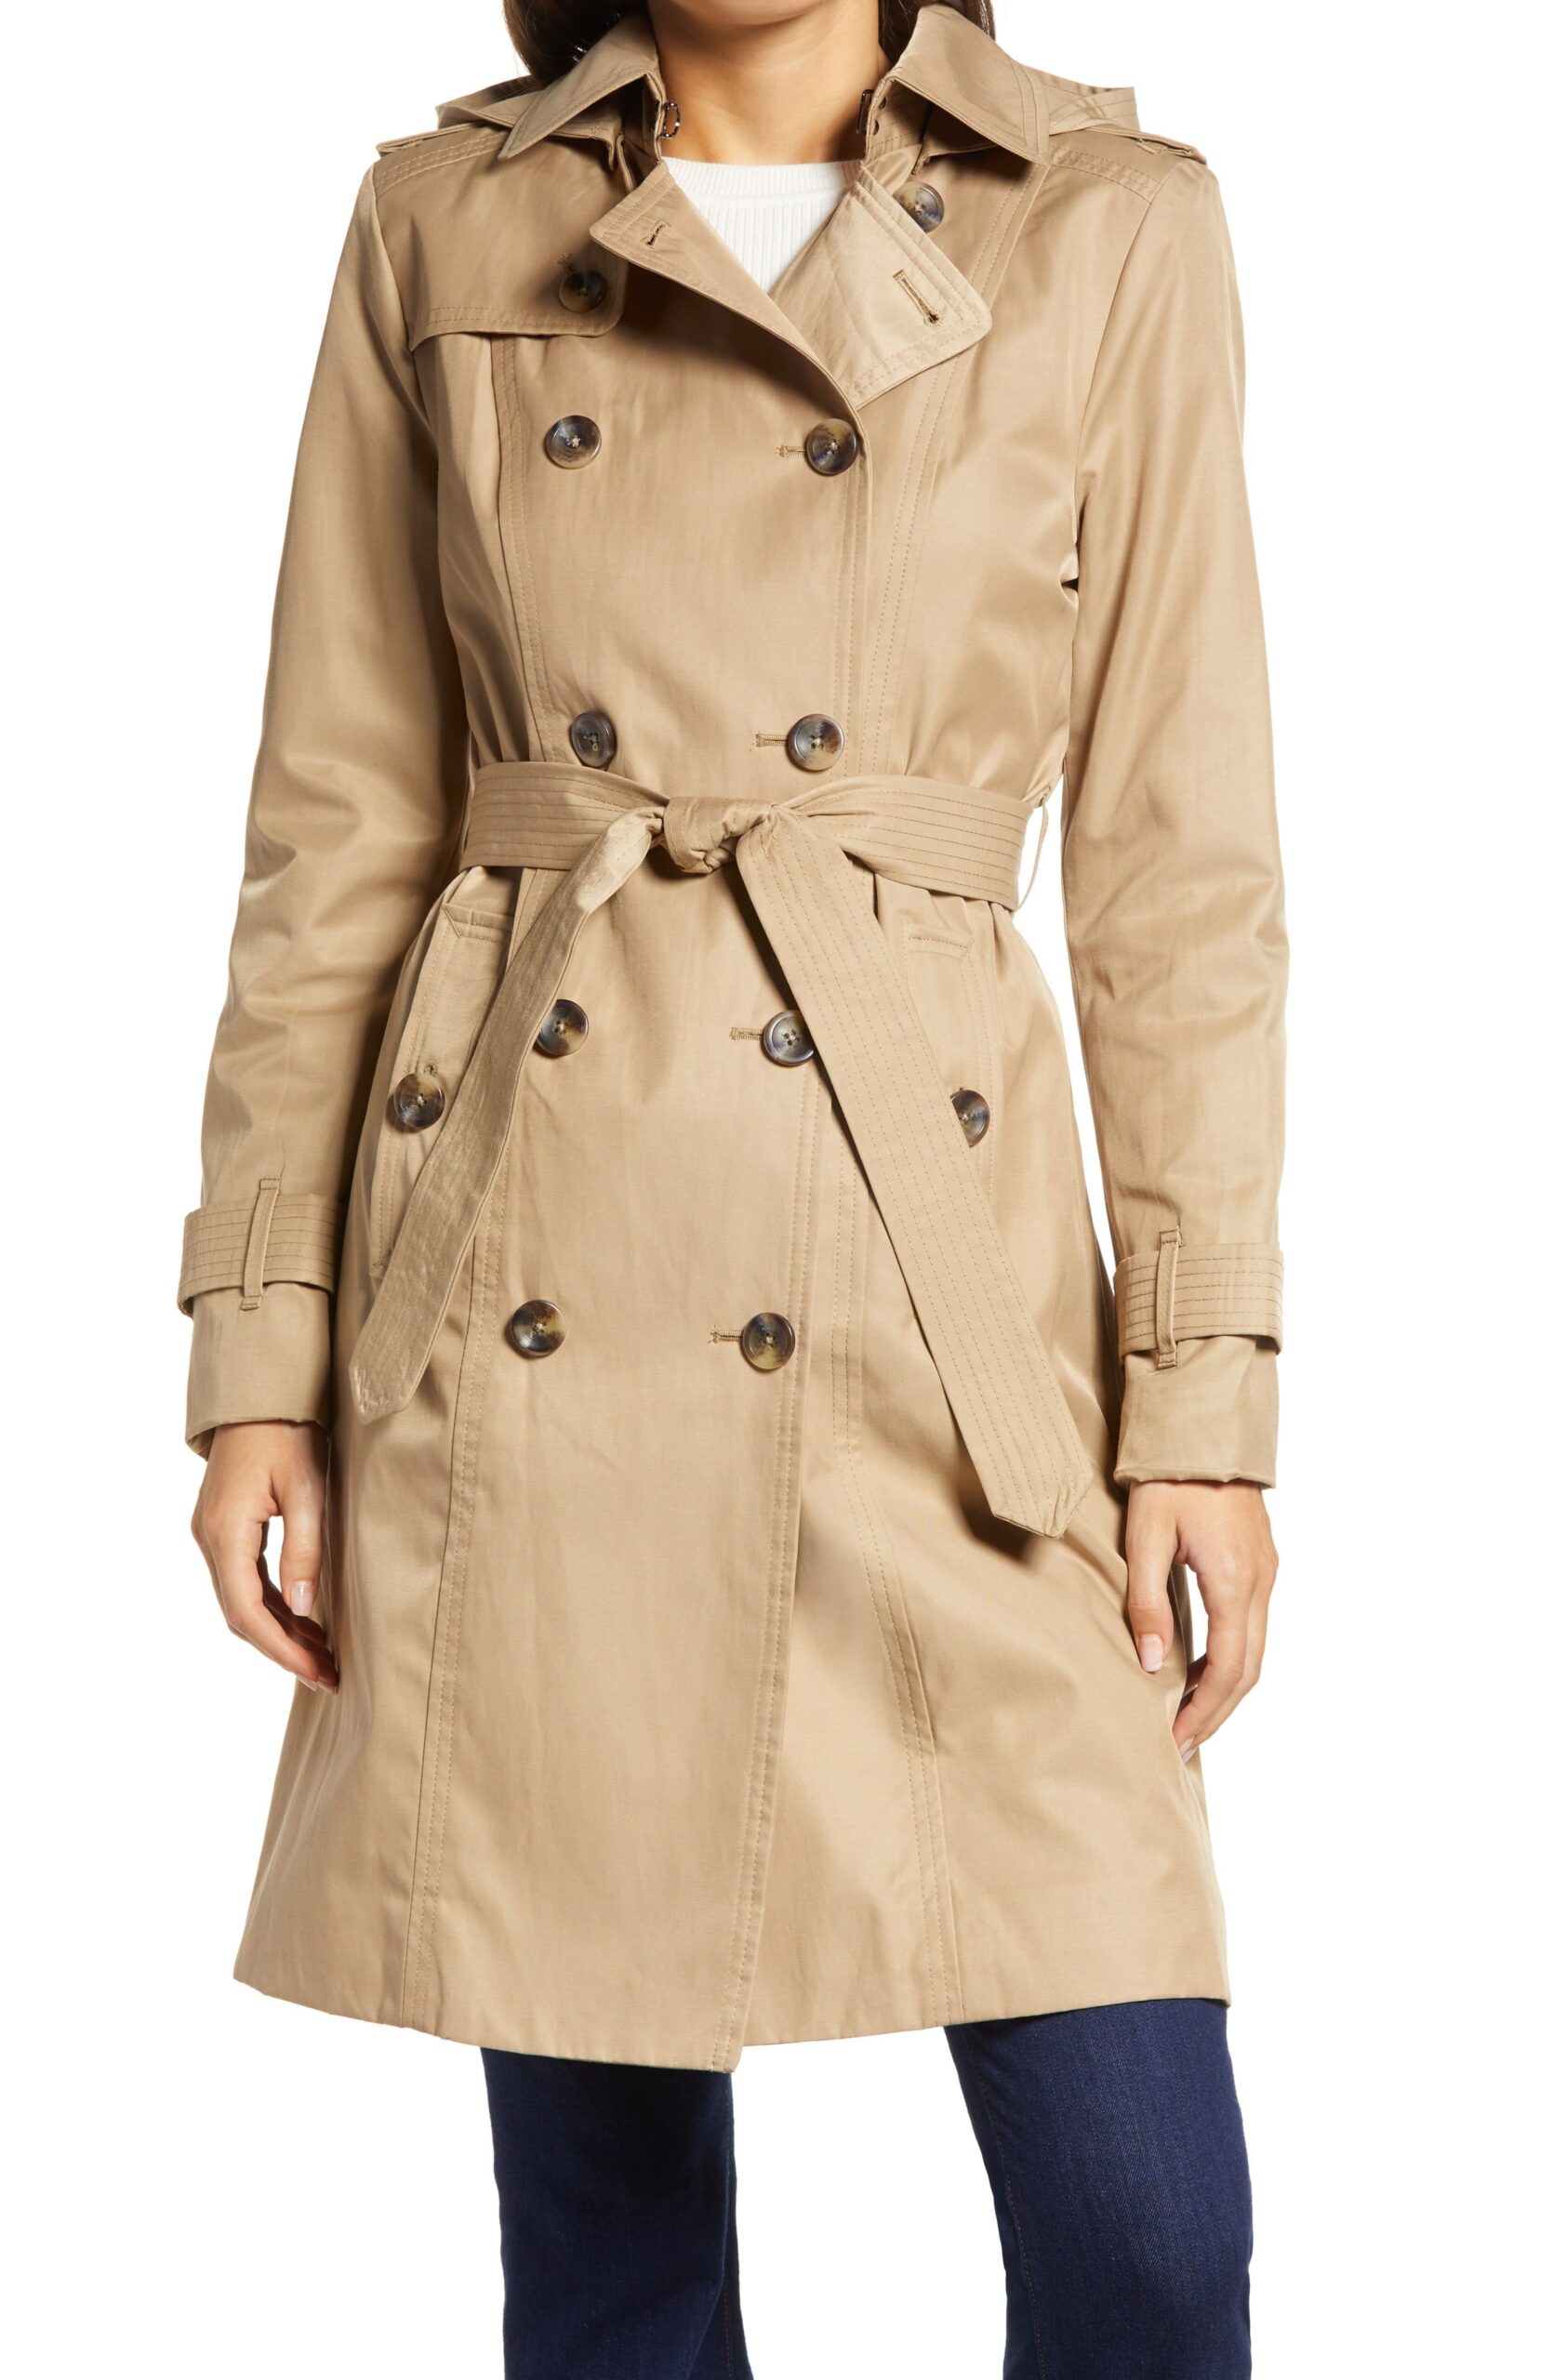 How to Build a Basic Wardrobe: Classic Trench Coat